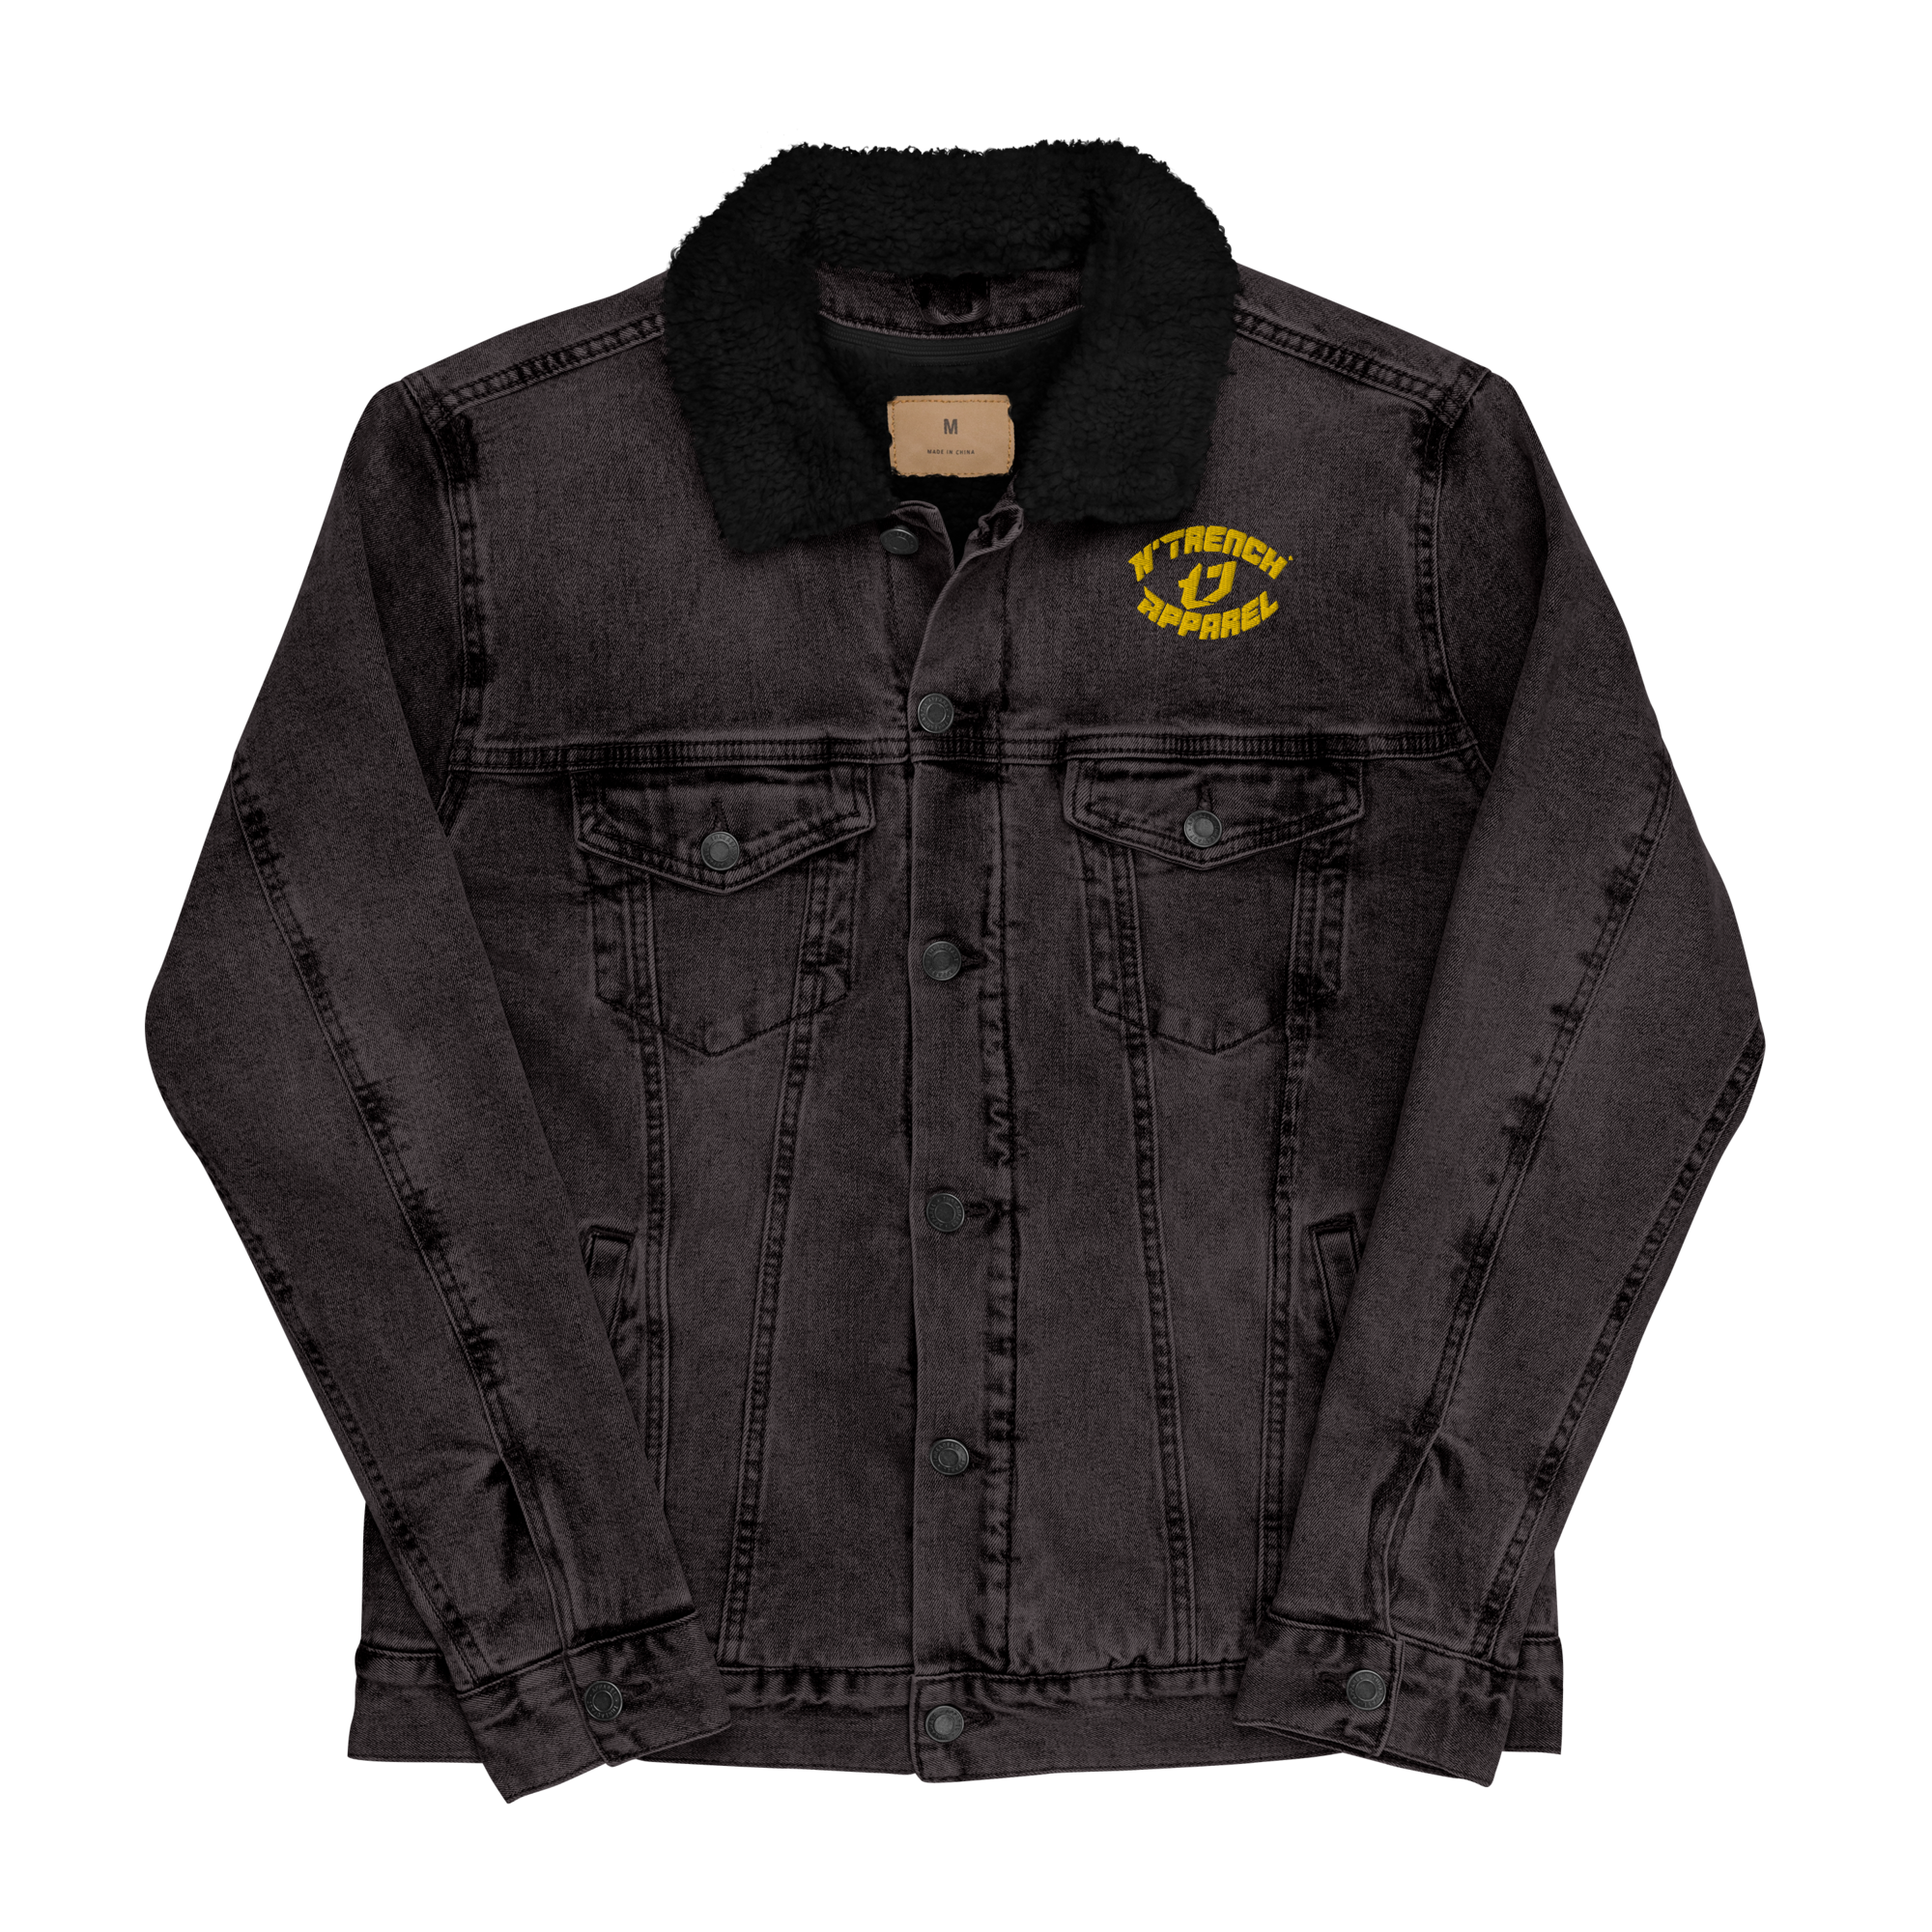 N'Trench Apparel Gold Lettering And Logo Women/Ladies Embroidery denim sherpa jacket